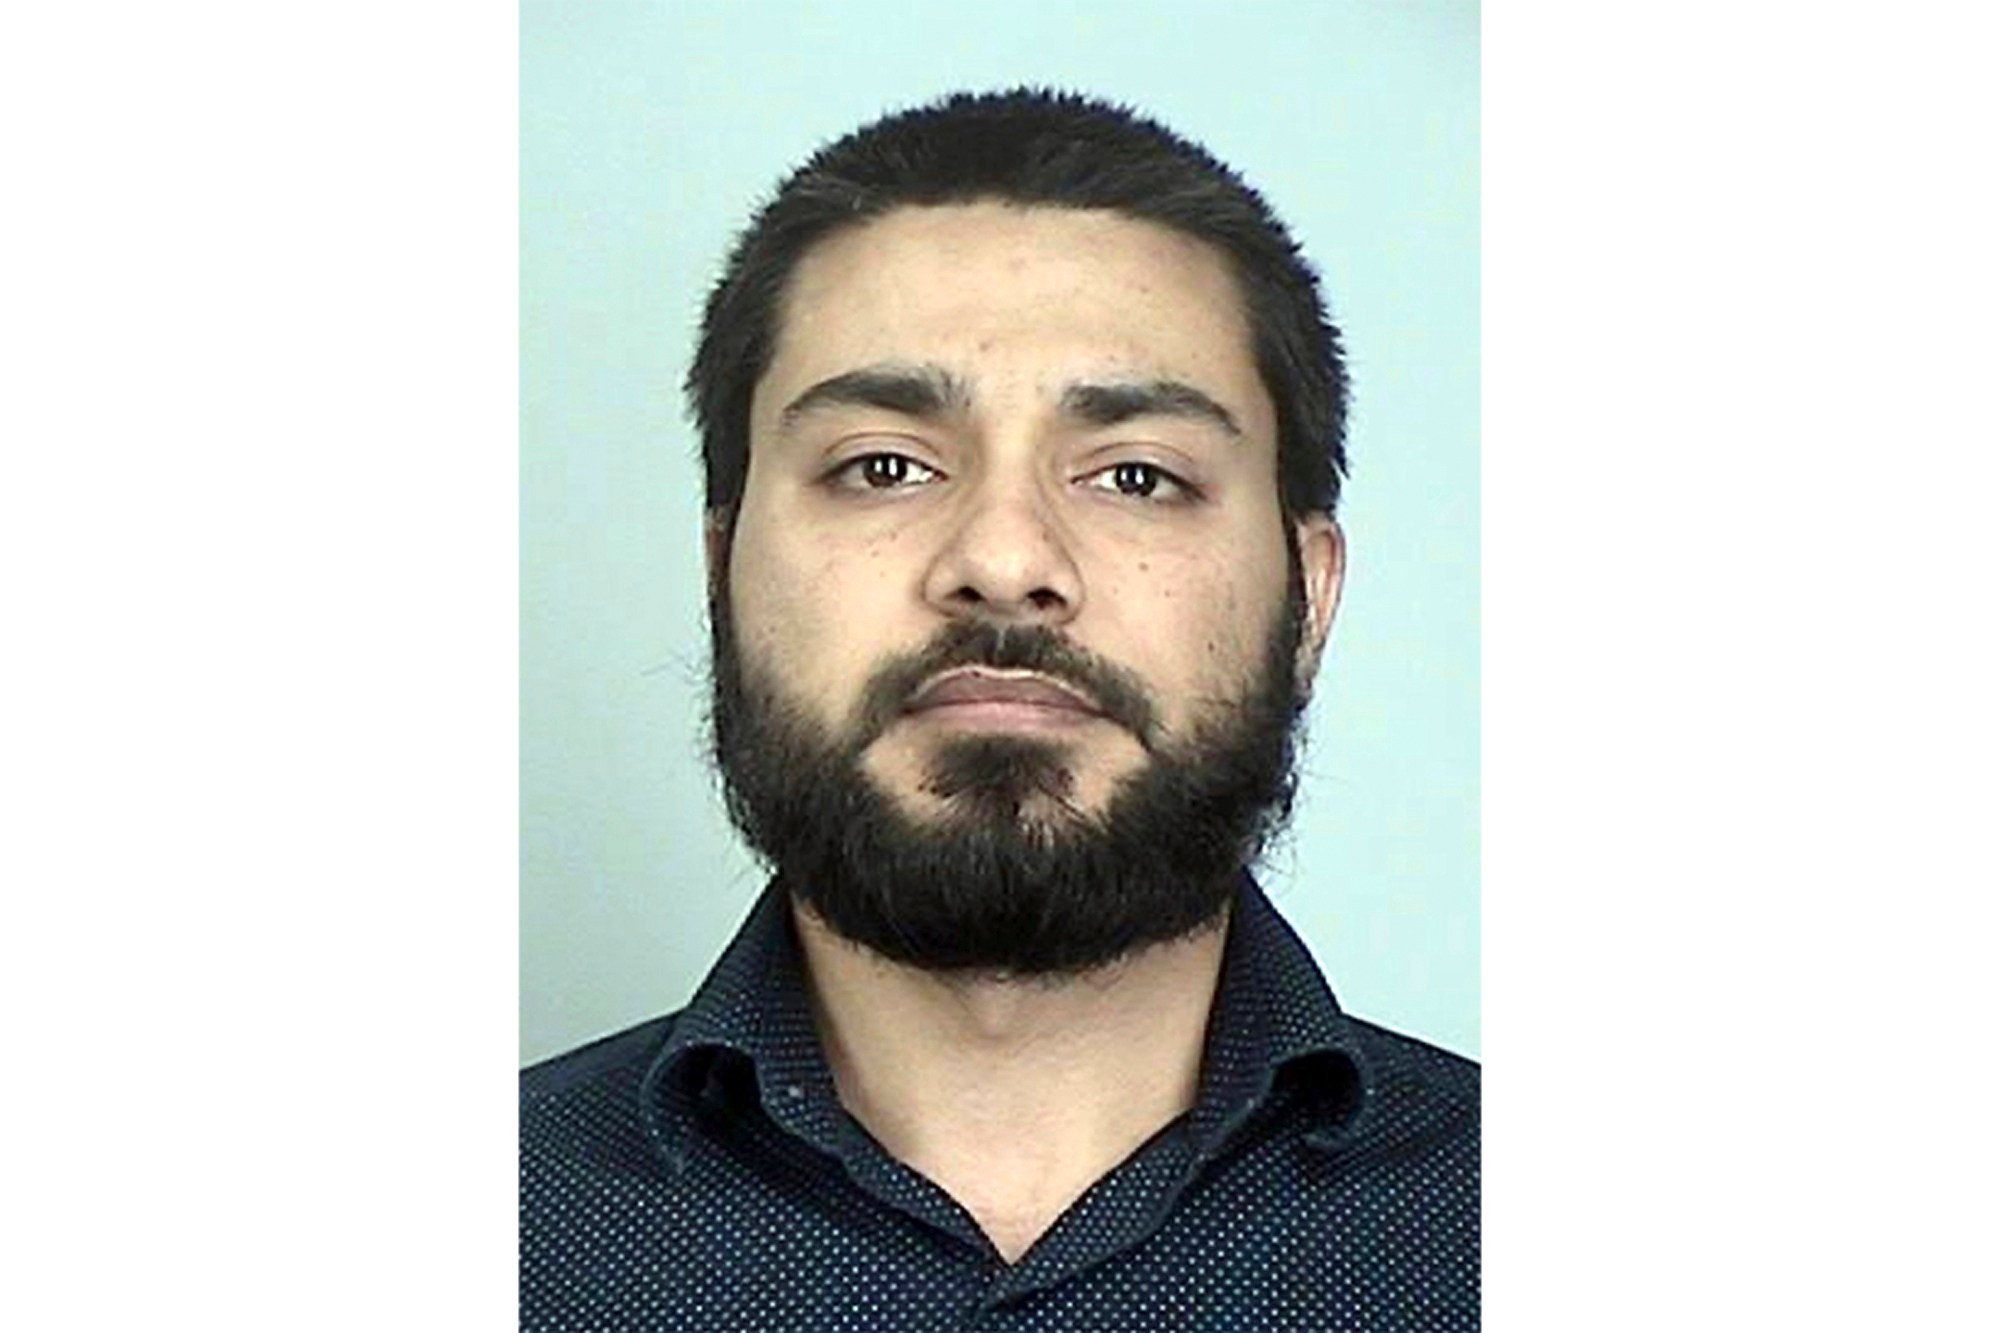 Muhammad Masood, a Pakistani doctor and former Mayo Clinic research coordinator, sought to join the Islamic State terrorist group to fight in Syria. Photo: Sherburne County Sheriff’s Office via AP